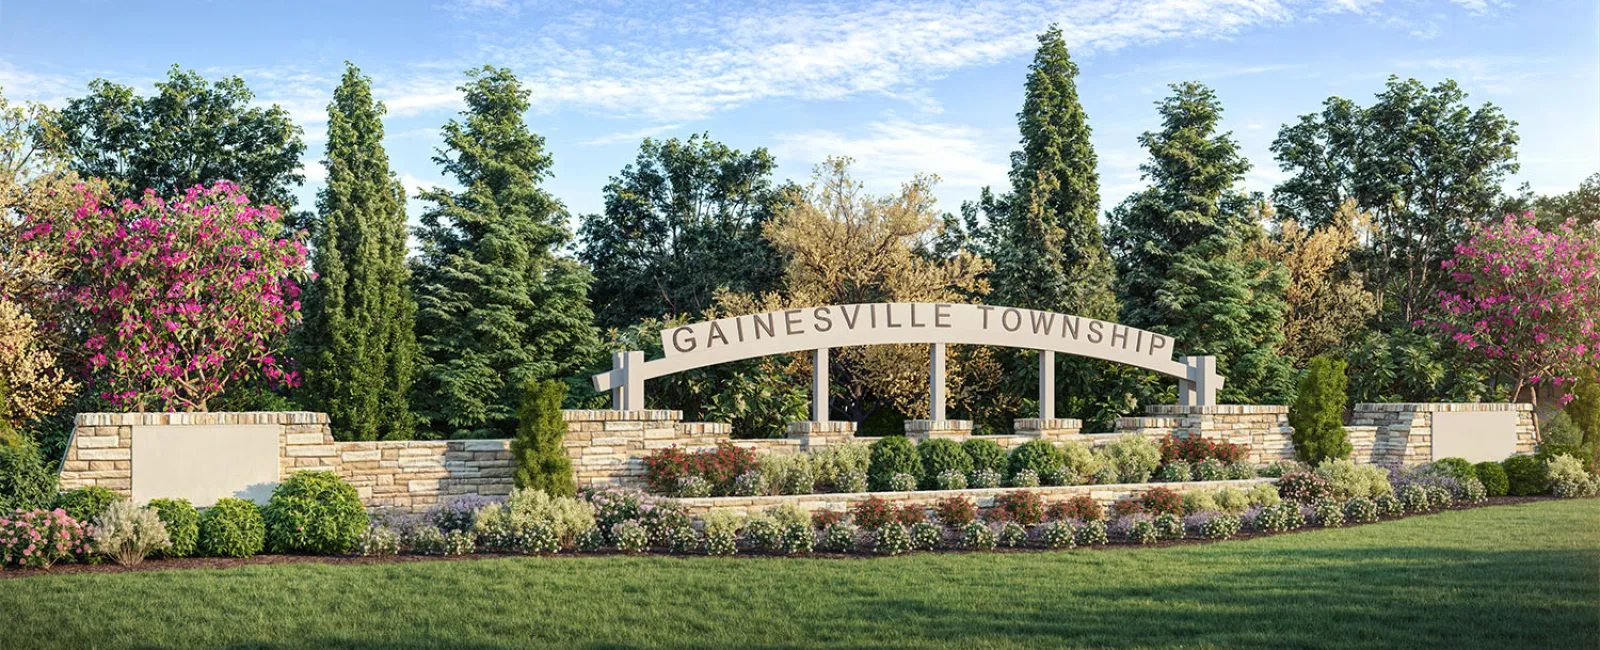 rendering of the Gainesville Township community entrance